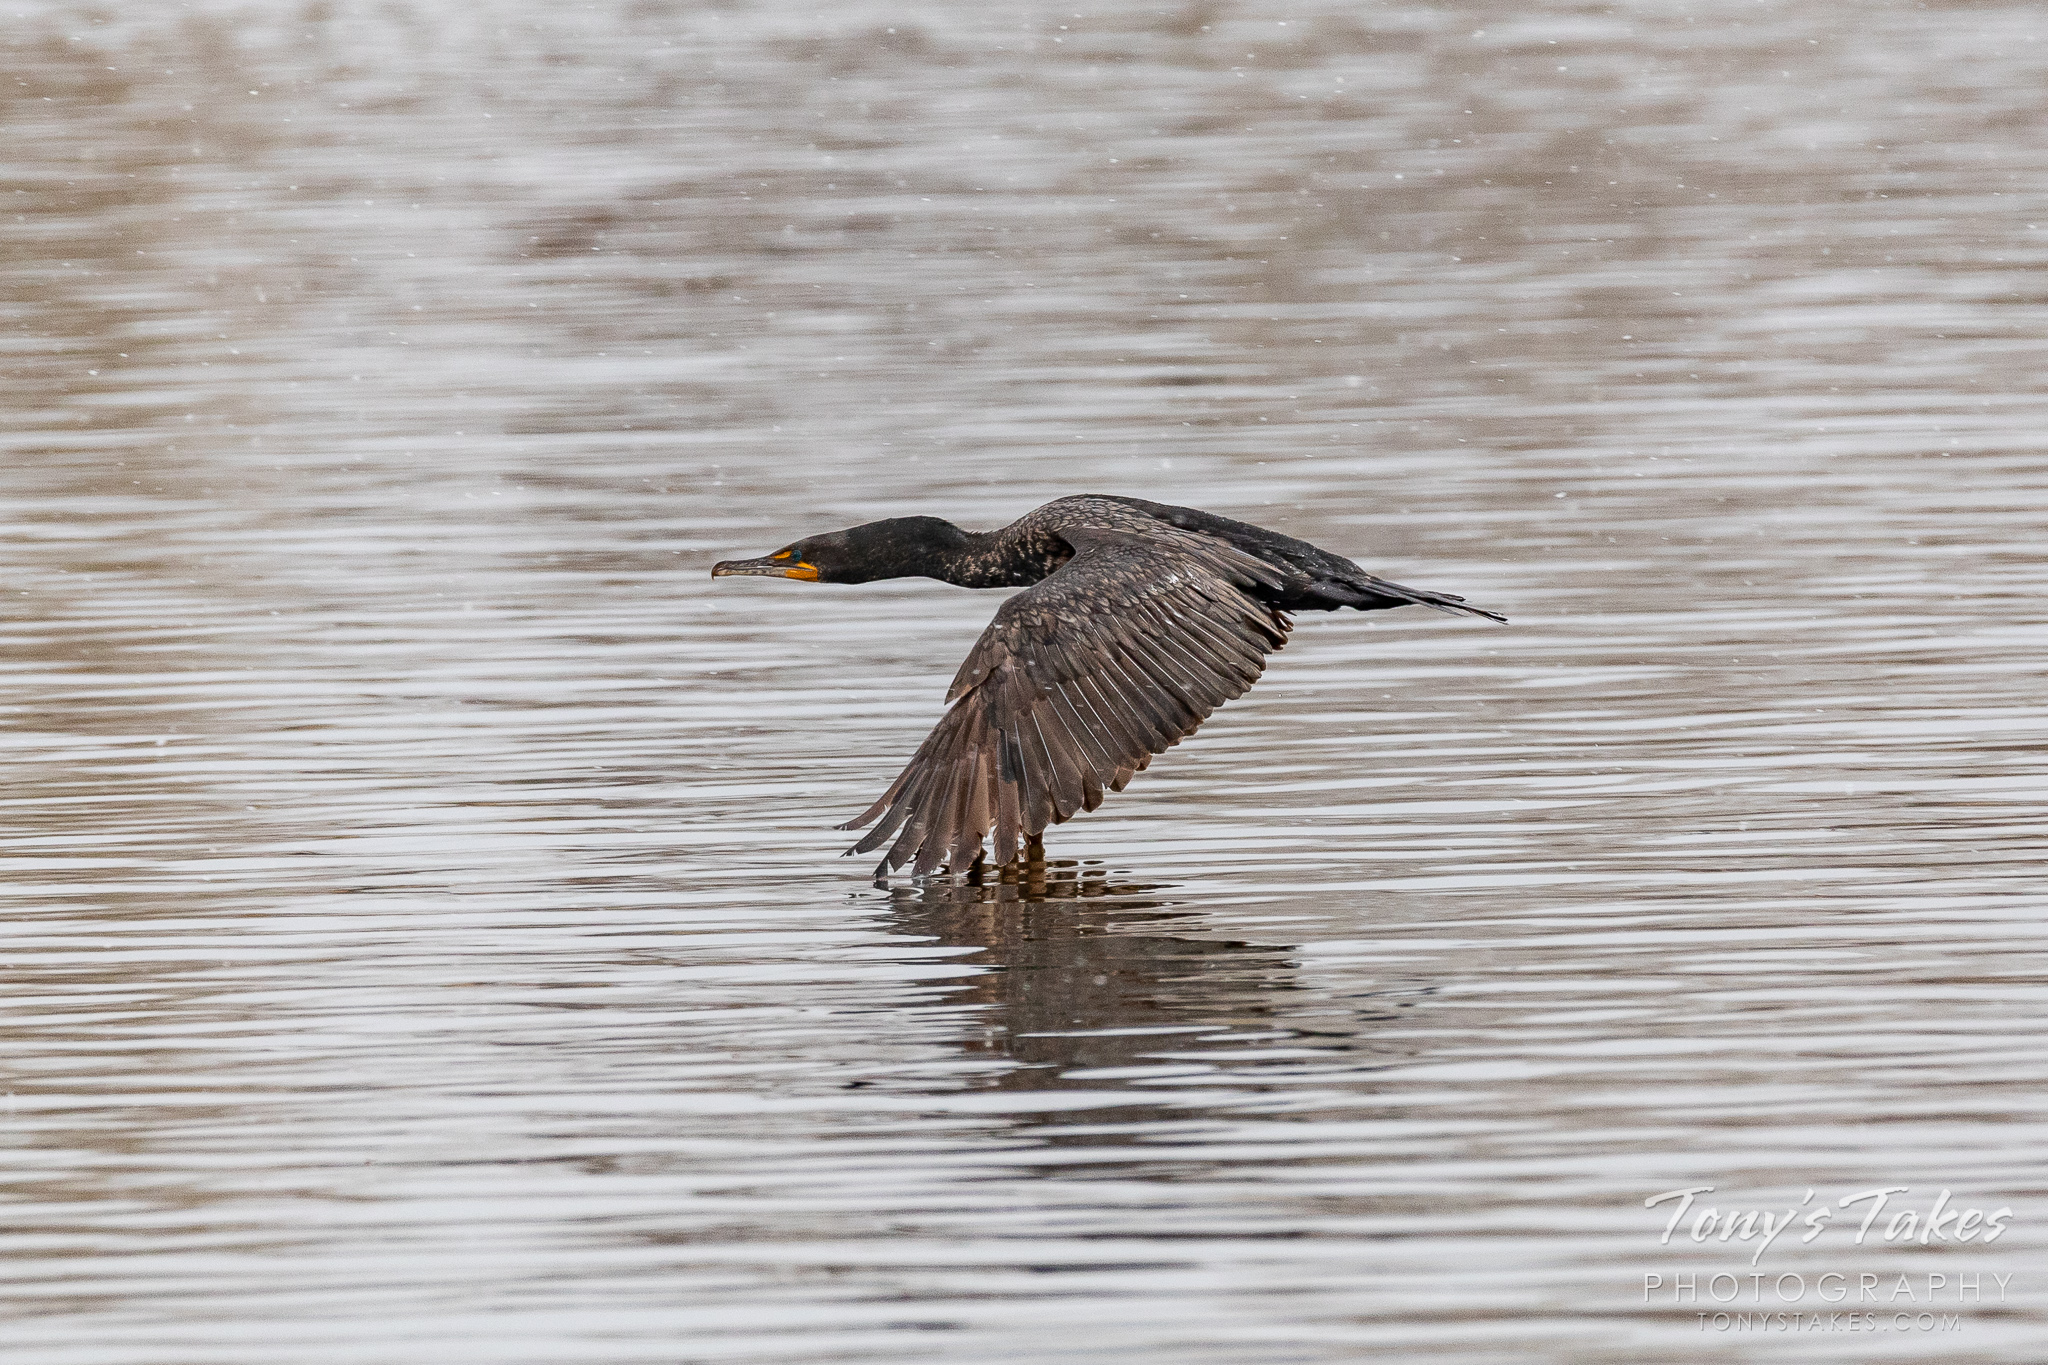 Cormorant tip-toes across the water